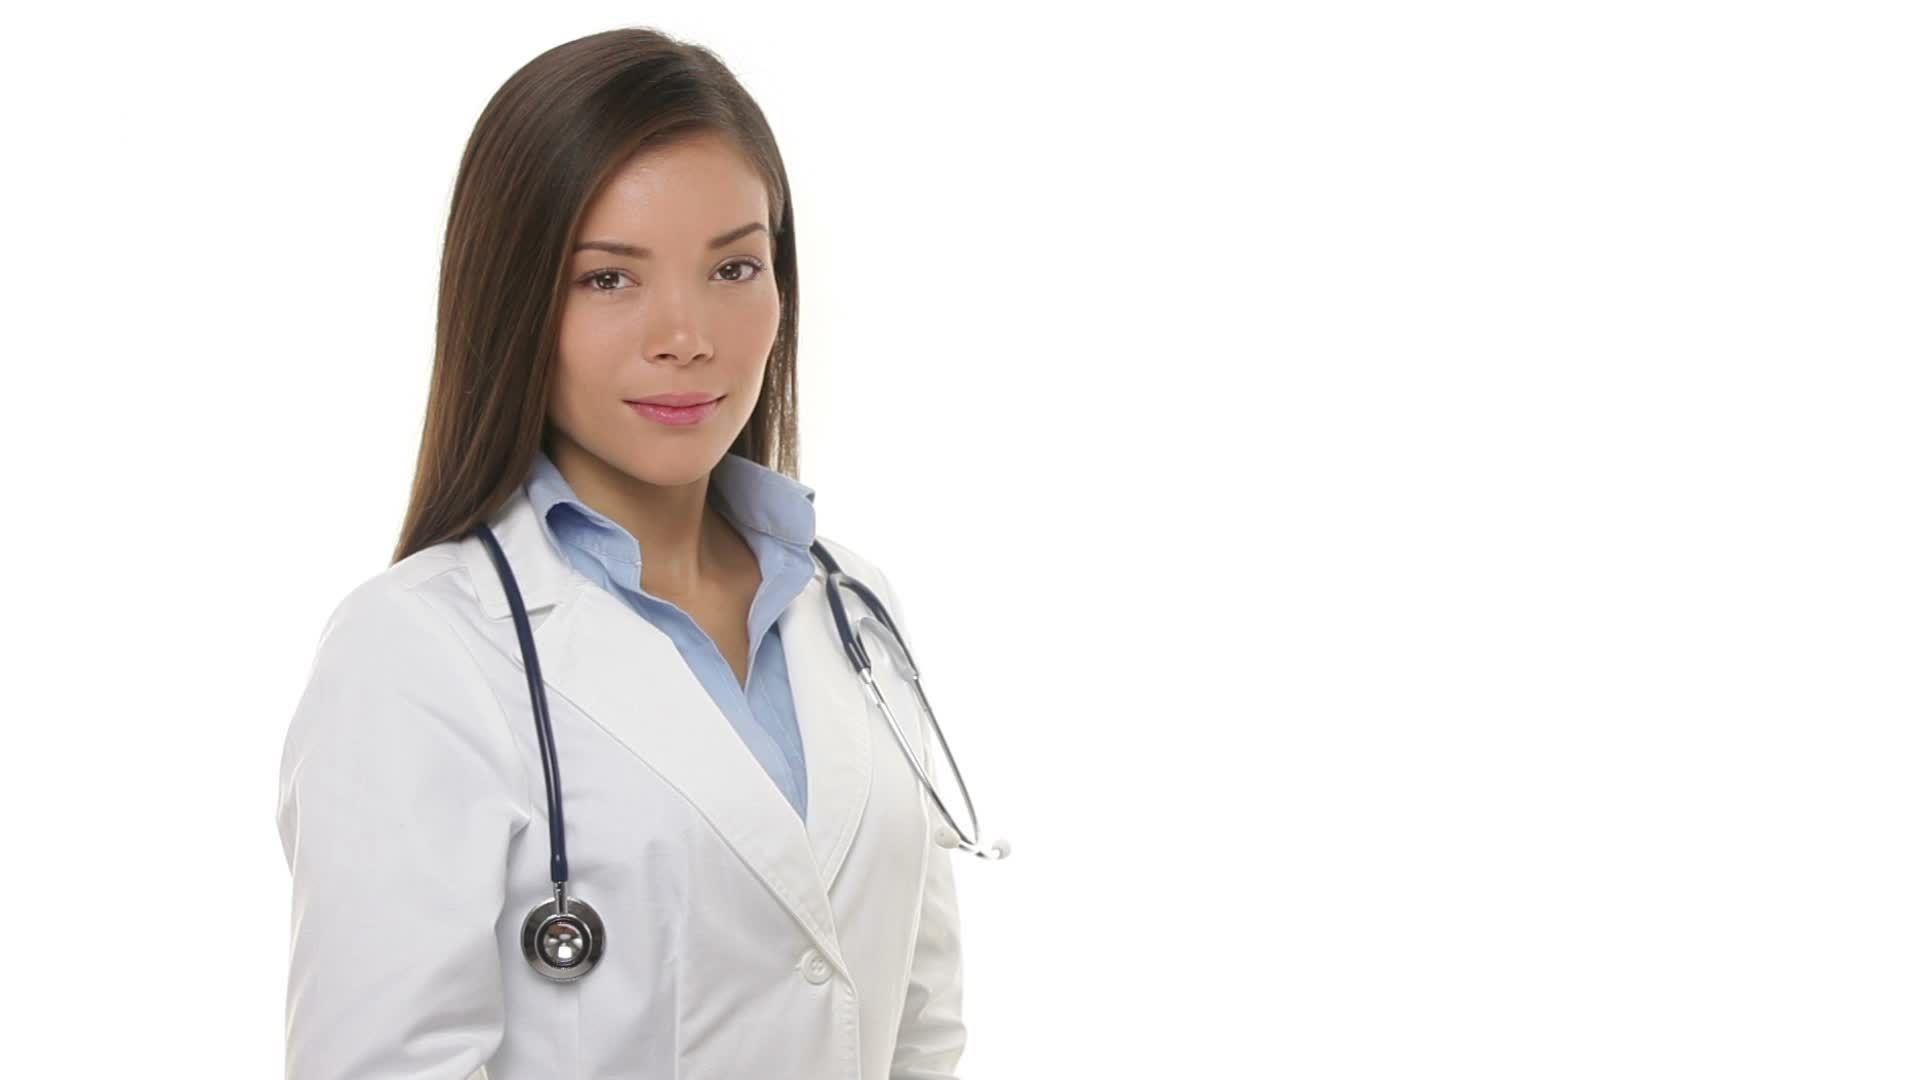 Video: Medical doctor woman portrait on white